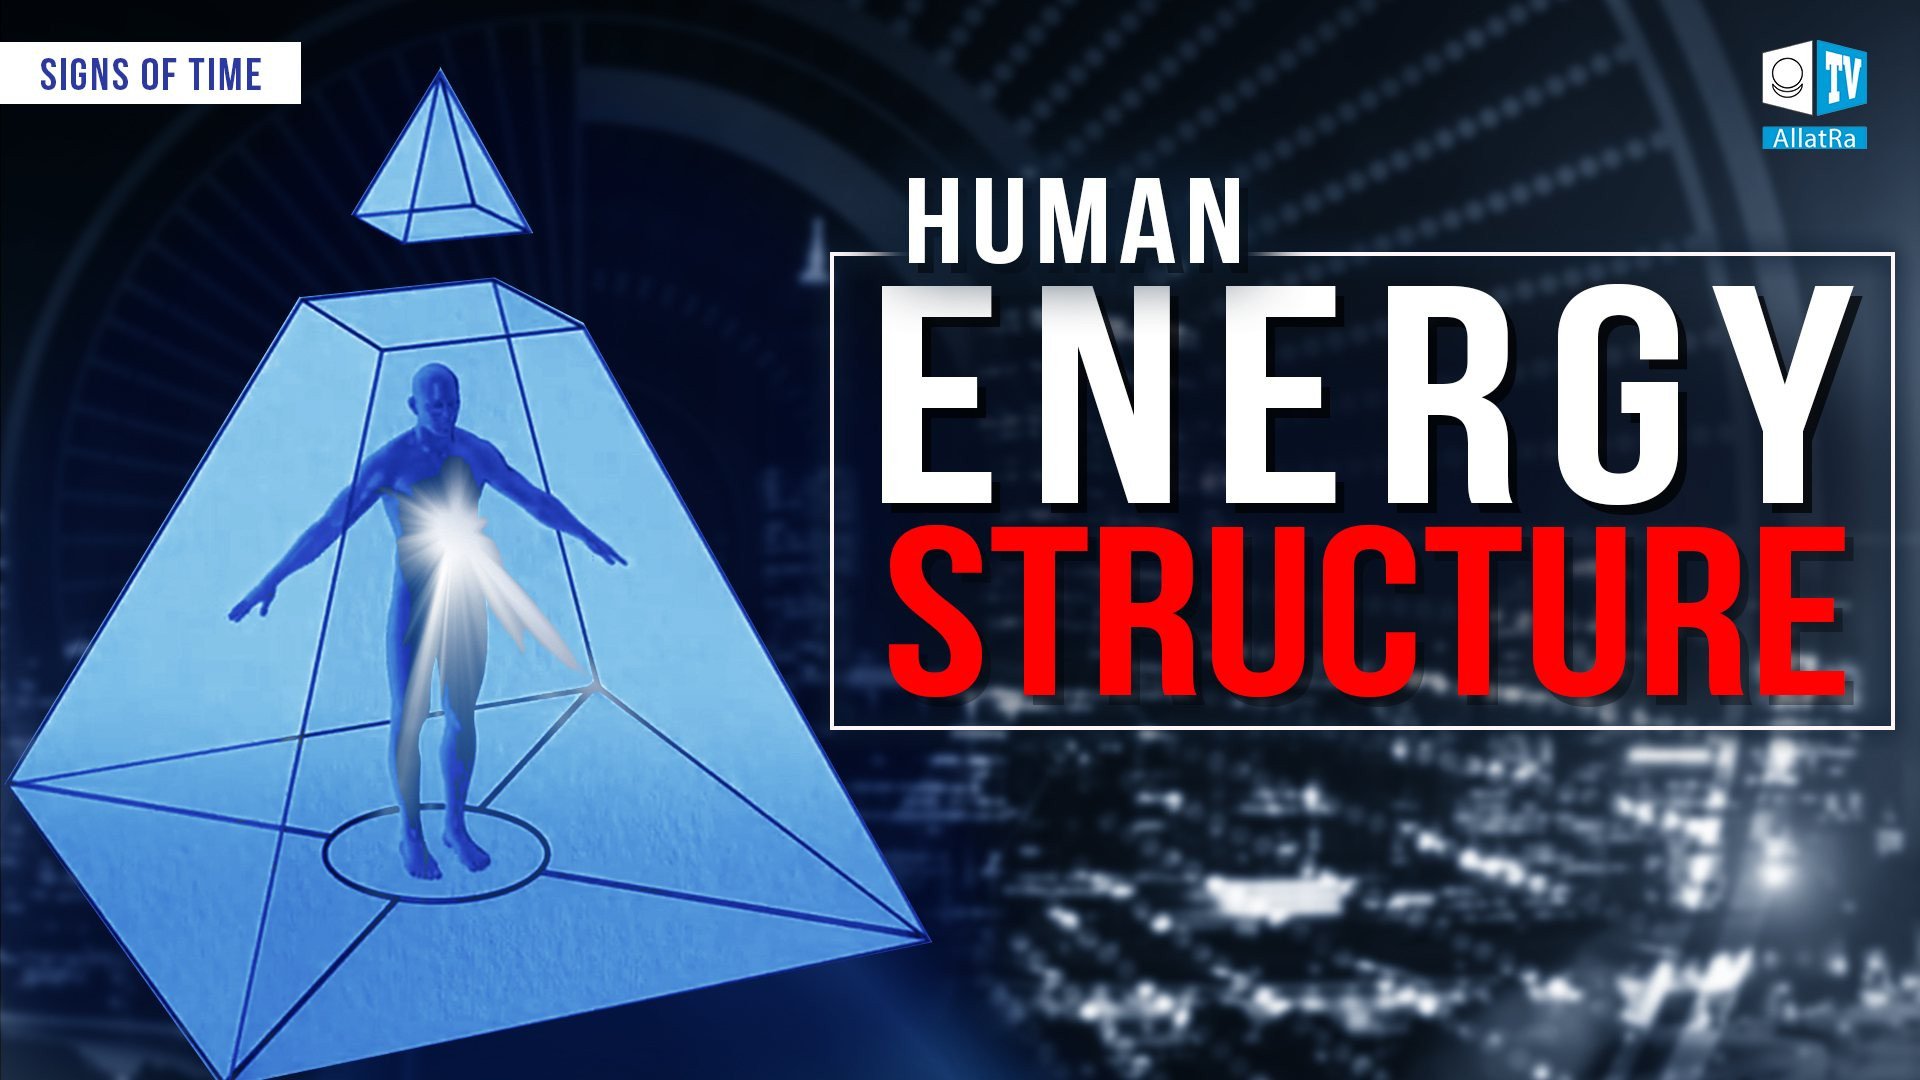 Human Energy Structure | Signs of Time